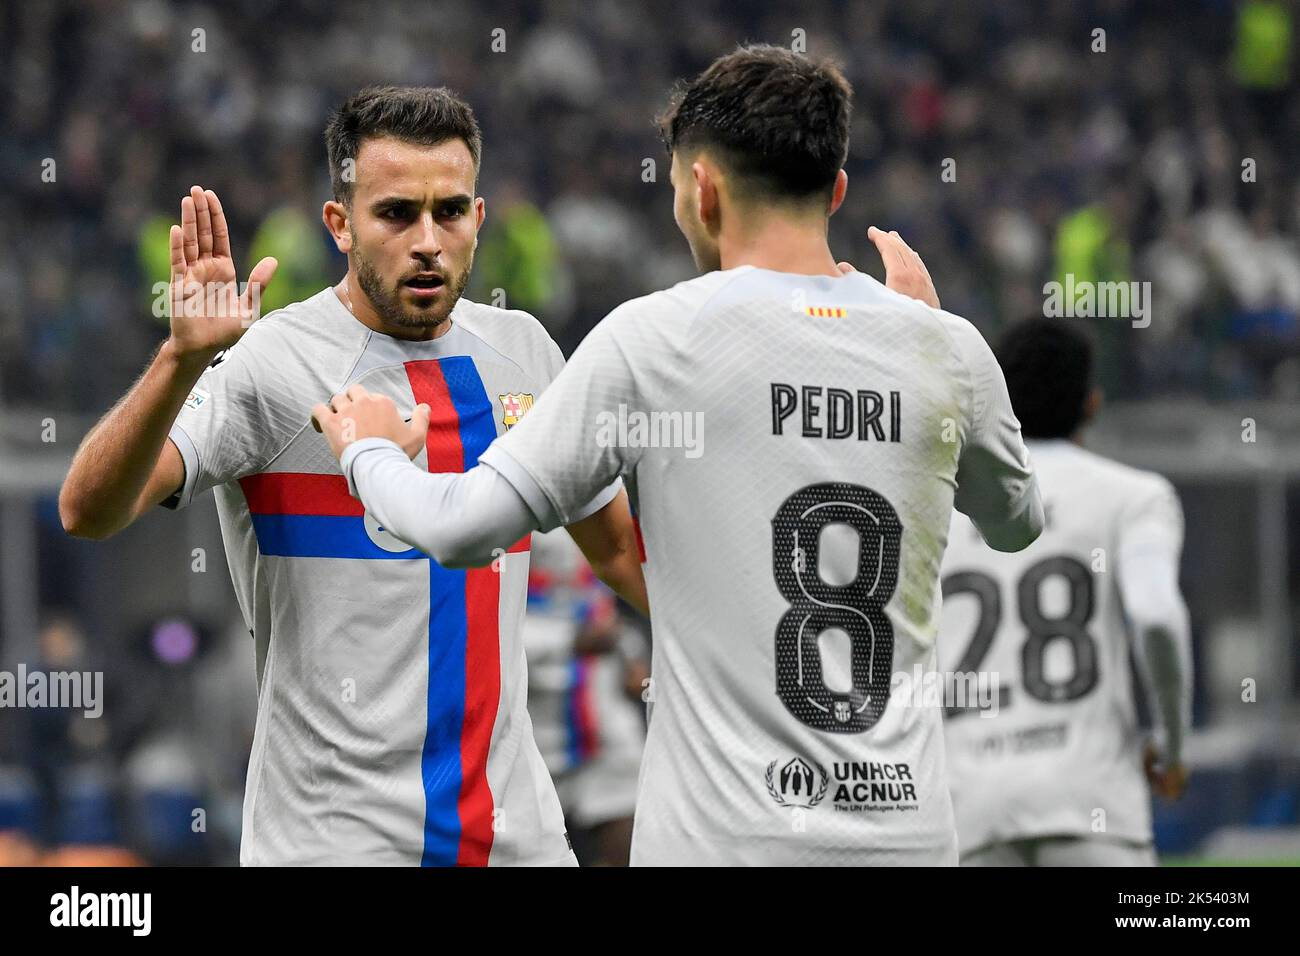 Pedro Gonzalez Lopez aka Pedri of Barcelona celebrates with Eric Garcia after scoring a goal, overruled by VAR, during the Champions League Group C fo Stock Photo